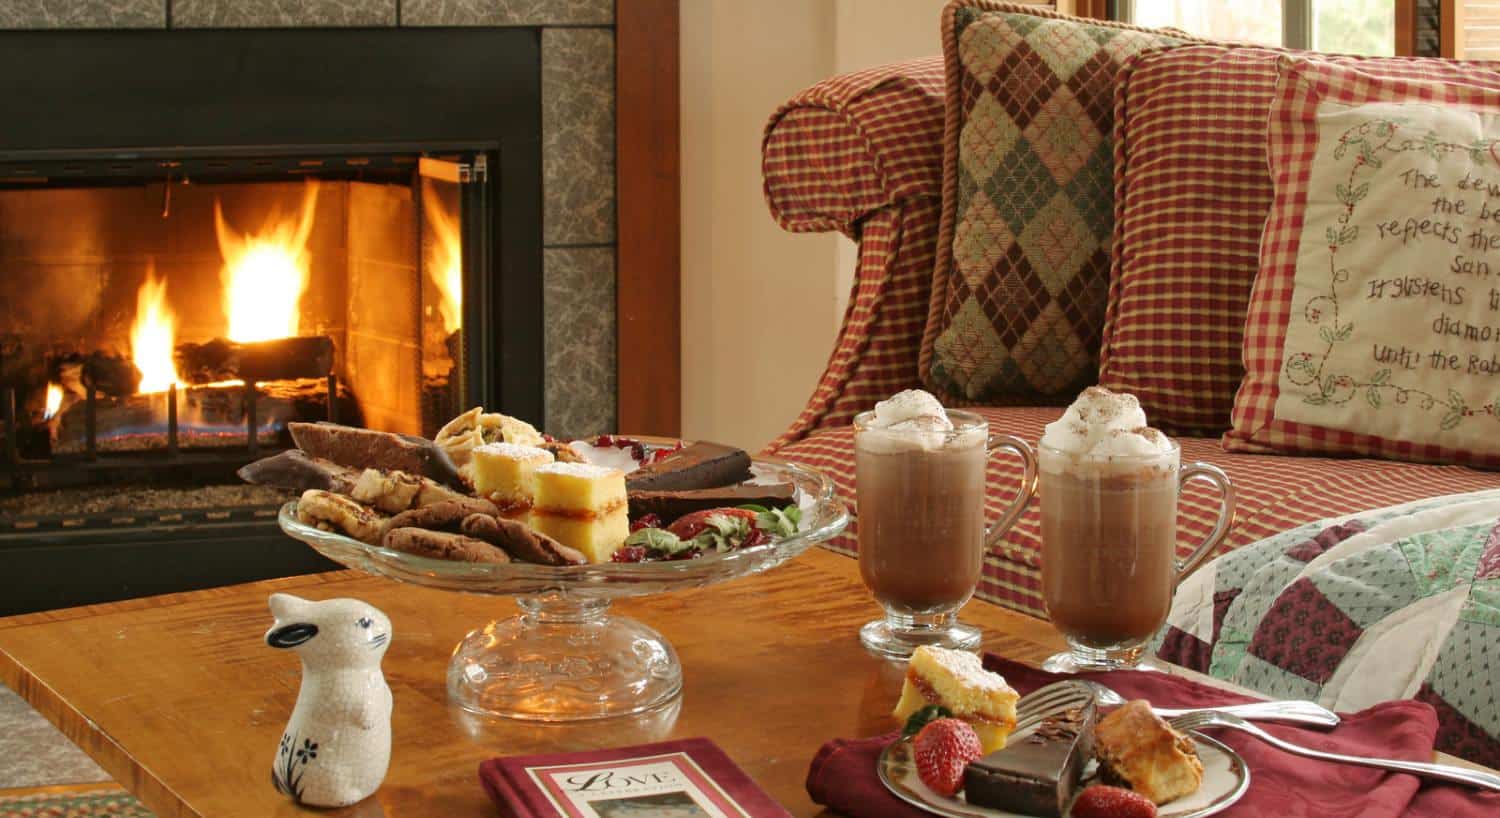 Close up view of glasses full of hot chocolate and serving dish full of desserts on wooden coffee table next to red-checked upholstered couch and fireplace